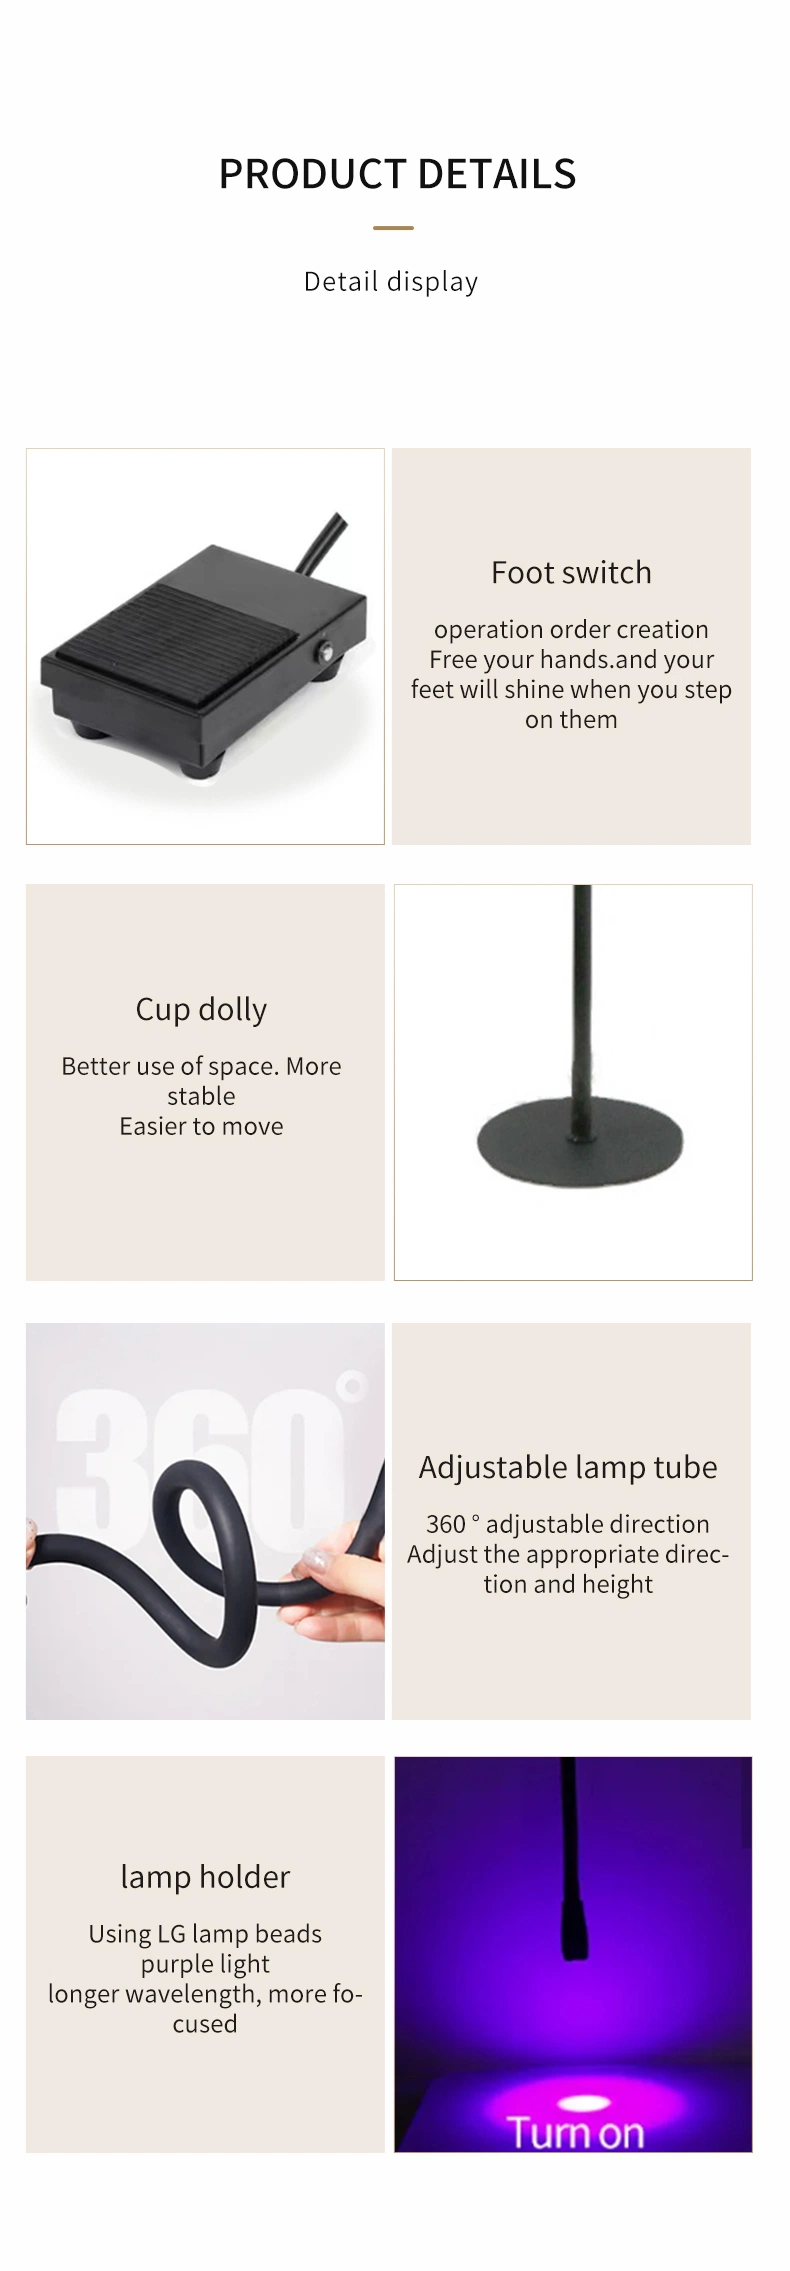 Floor Stand LED Lash Lamp for UV Extension with Foot Pedal